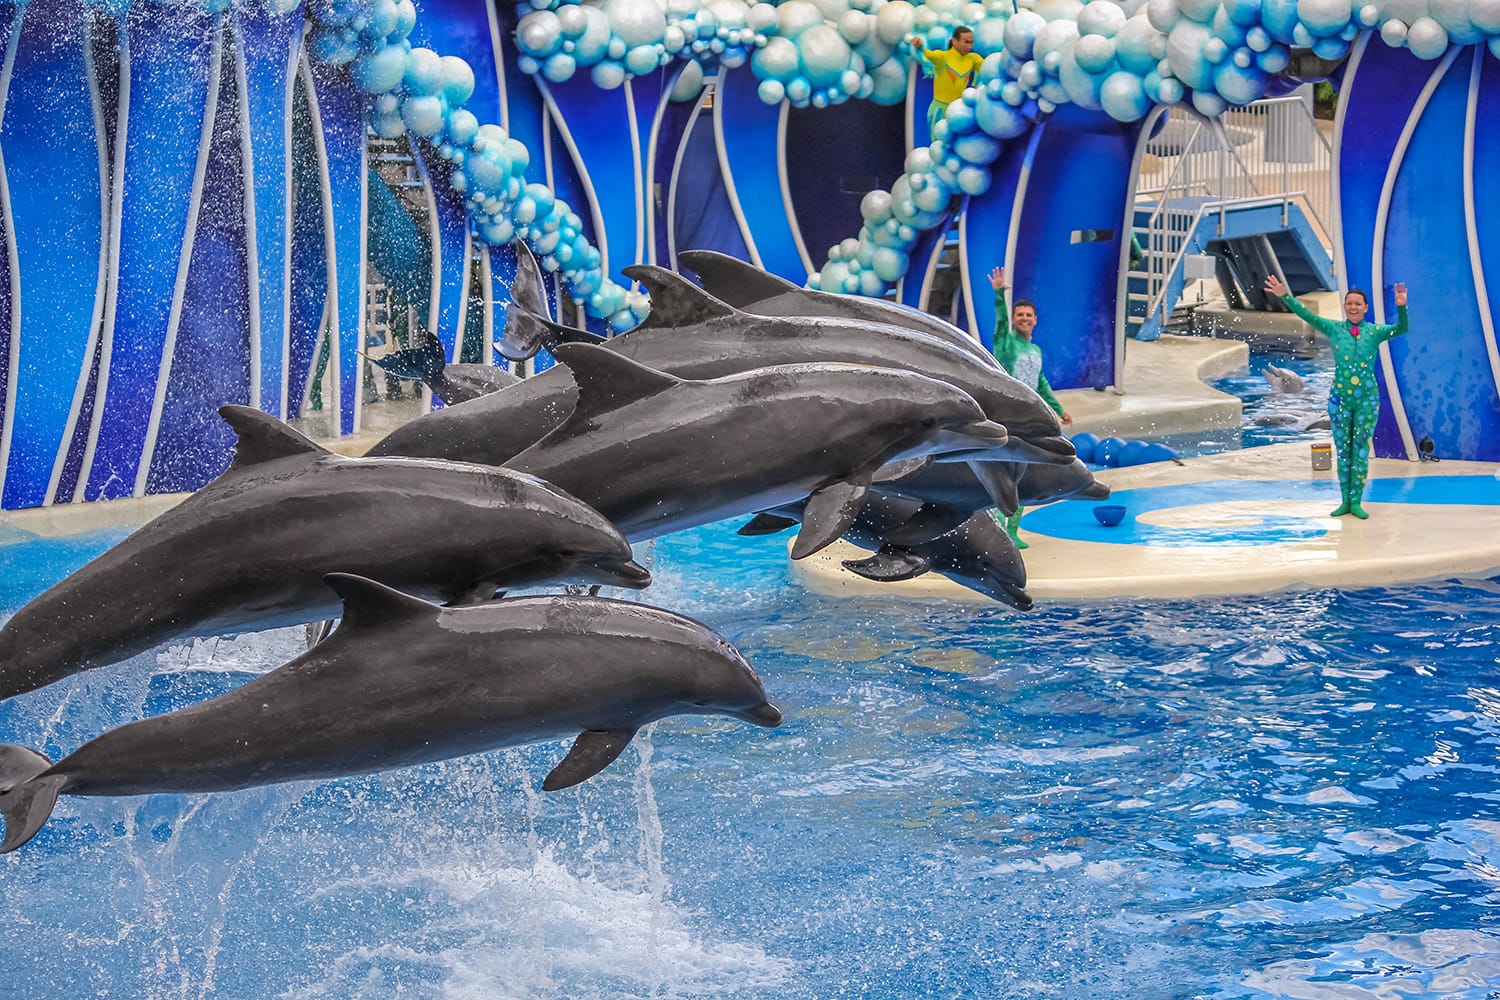 A group of dolphins jumping together in Azul Show at Seaworld.